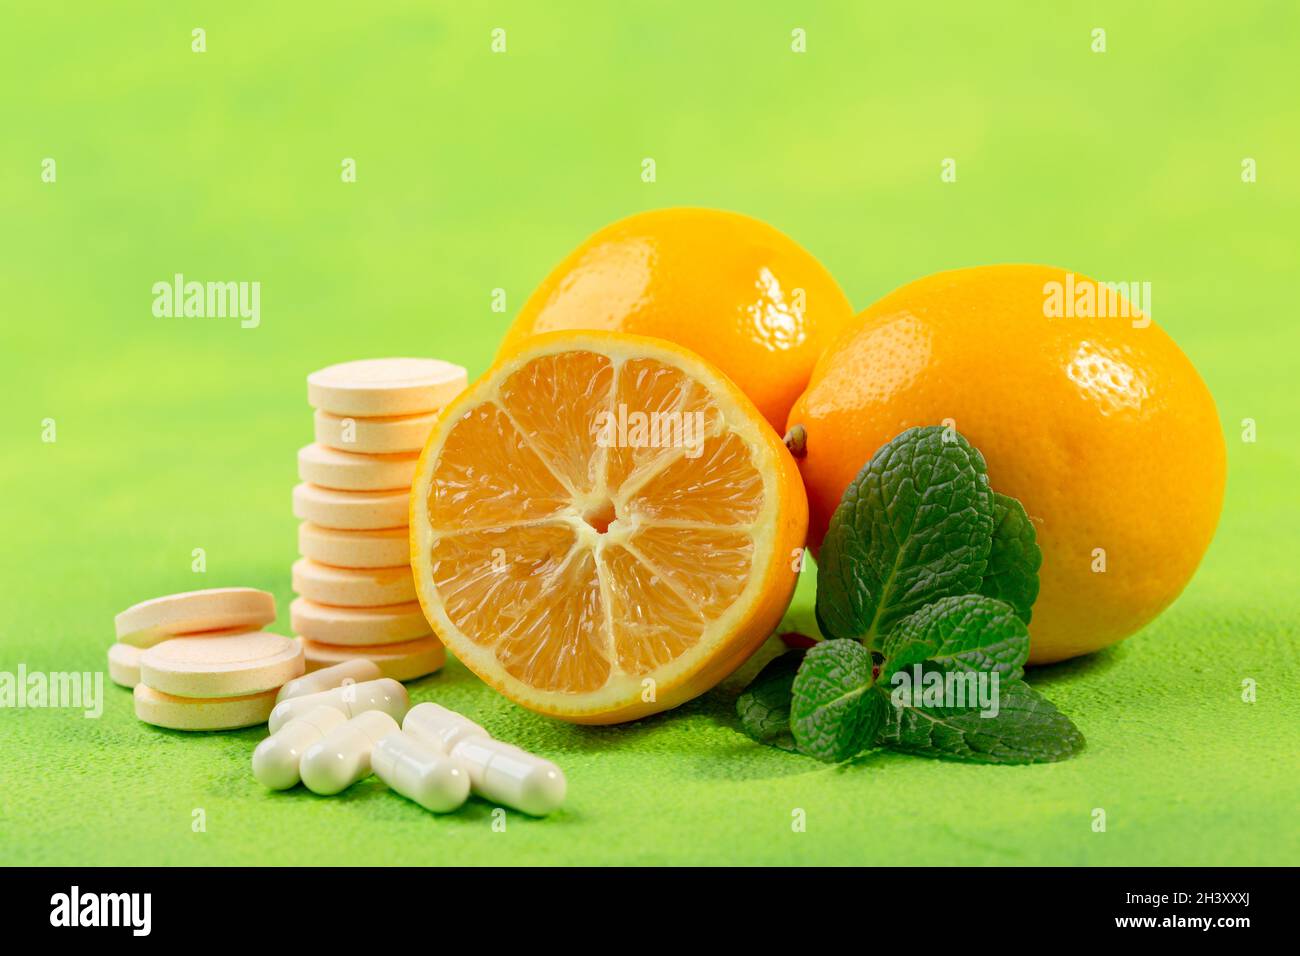 Healthy foods and medicine concept. Stock Photo